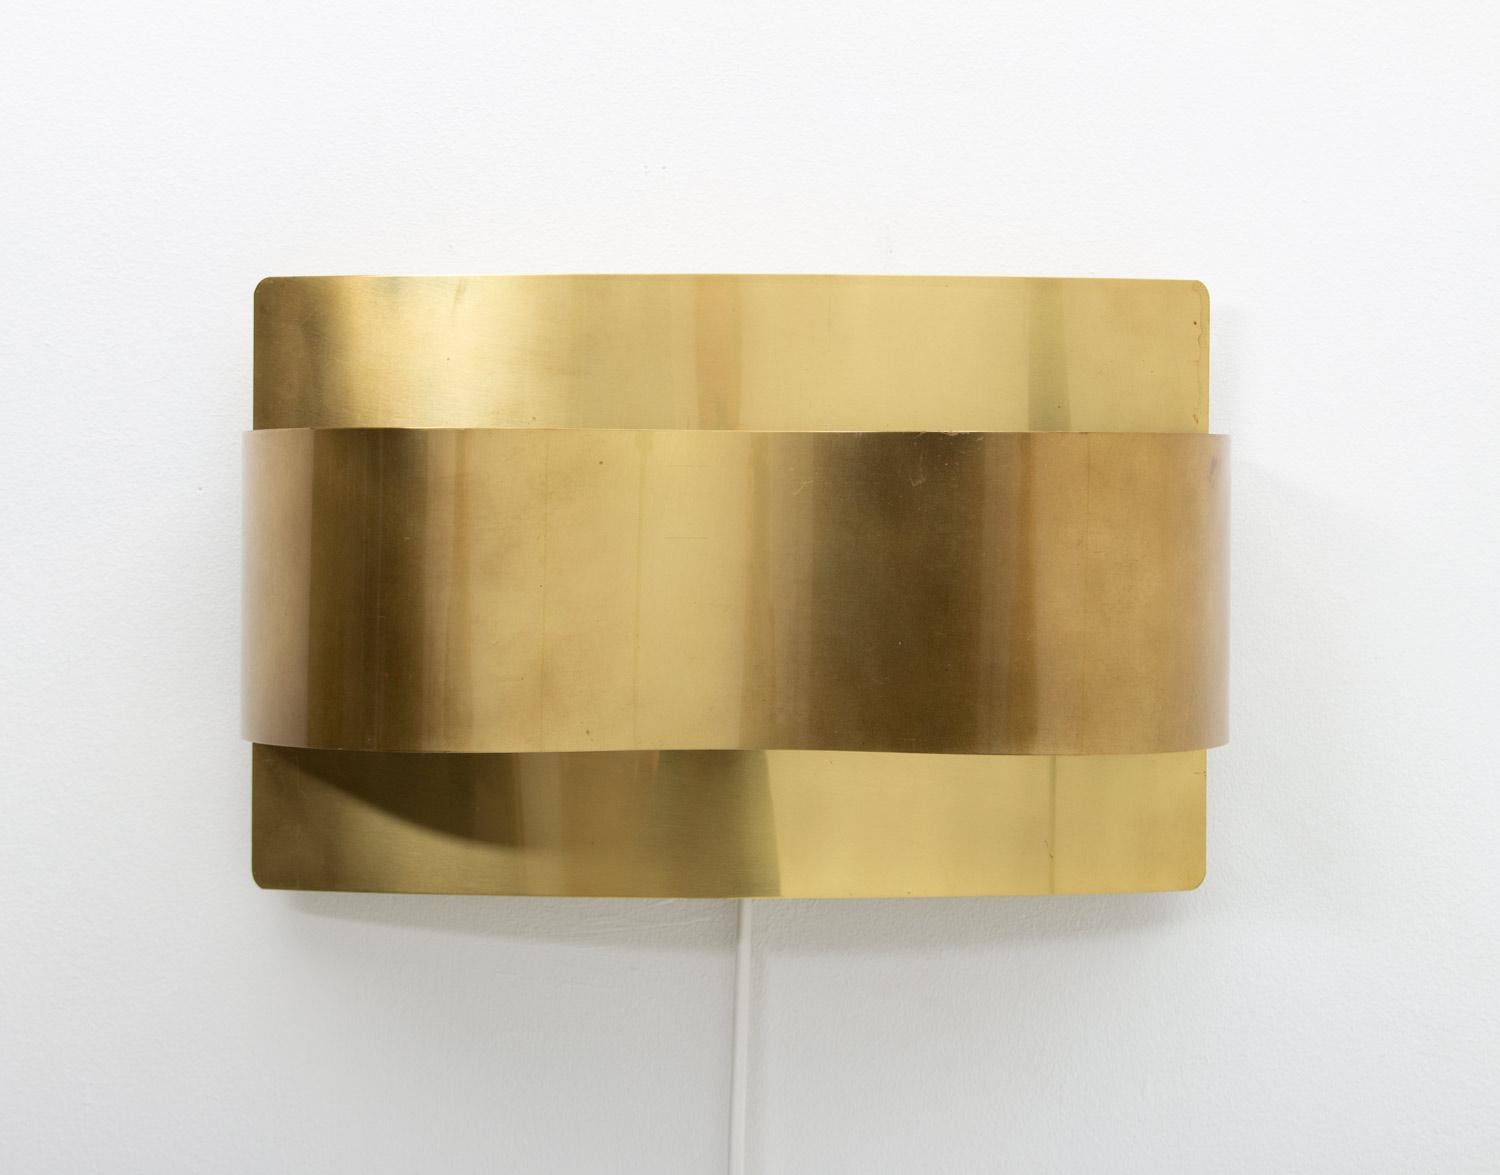 Rare version of brass sconces by Peter Celsing for Falkenbergs Belysning, Sweden, 1970s.
The design of these lamps reminds of the shapes of the 1930s and 1940s and would harmonise perfectly with a curved sofa, for example.
Condition: Original